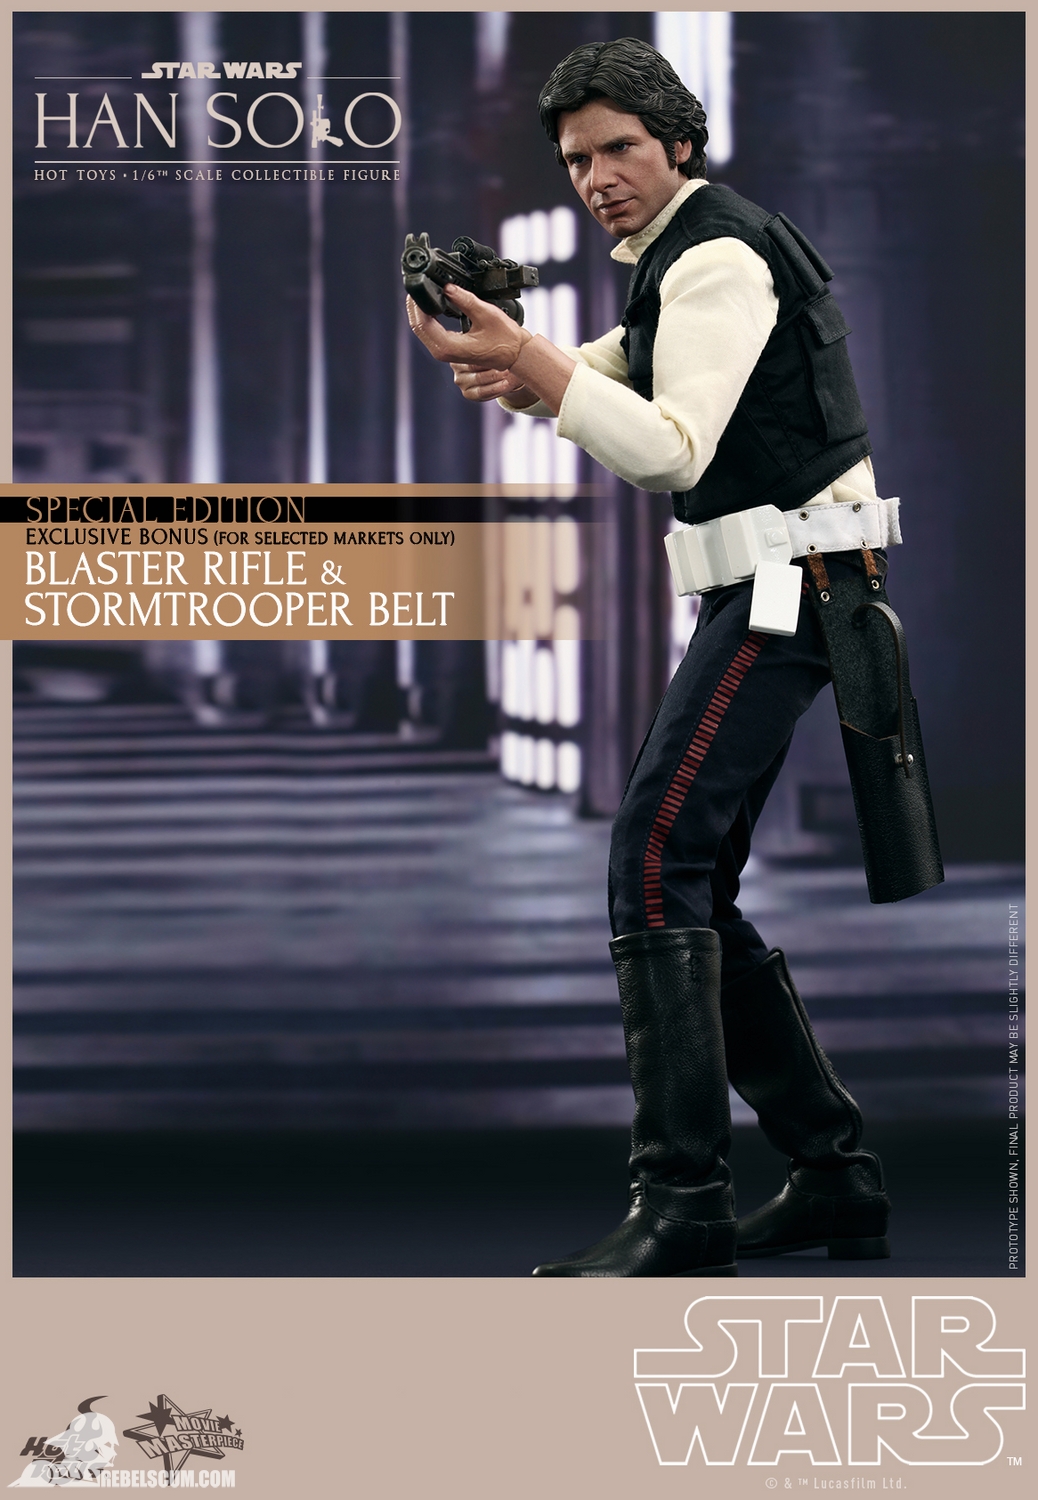 Hot-Toys-A-New-Hope-Han-solo-Movie-Masterpiece-Series-004.jpg